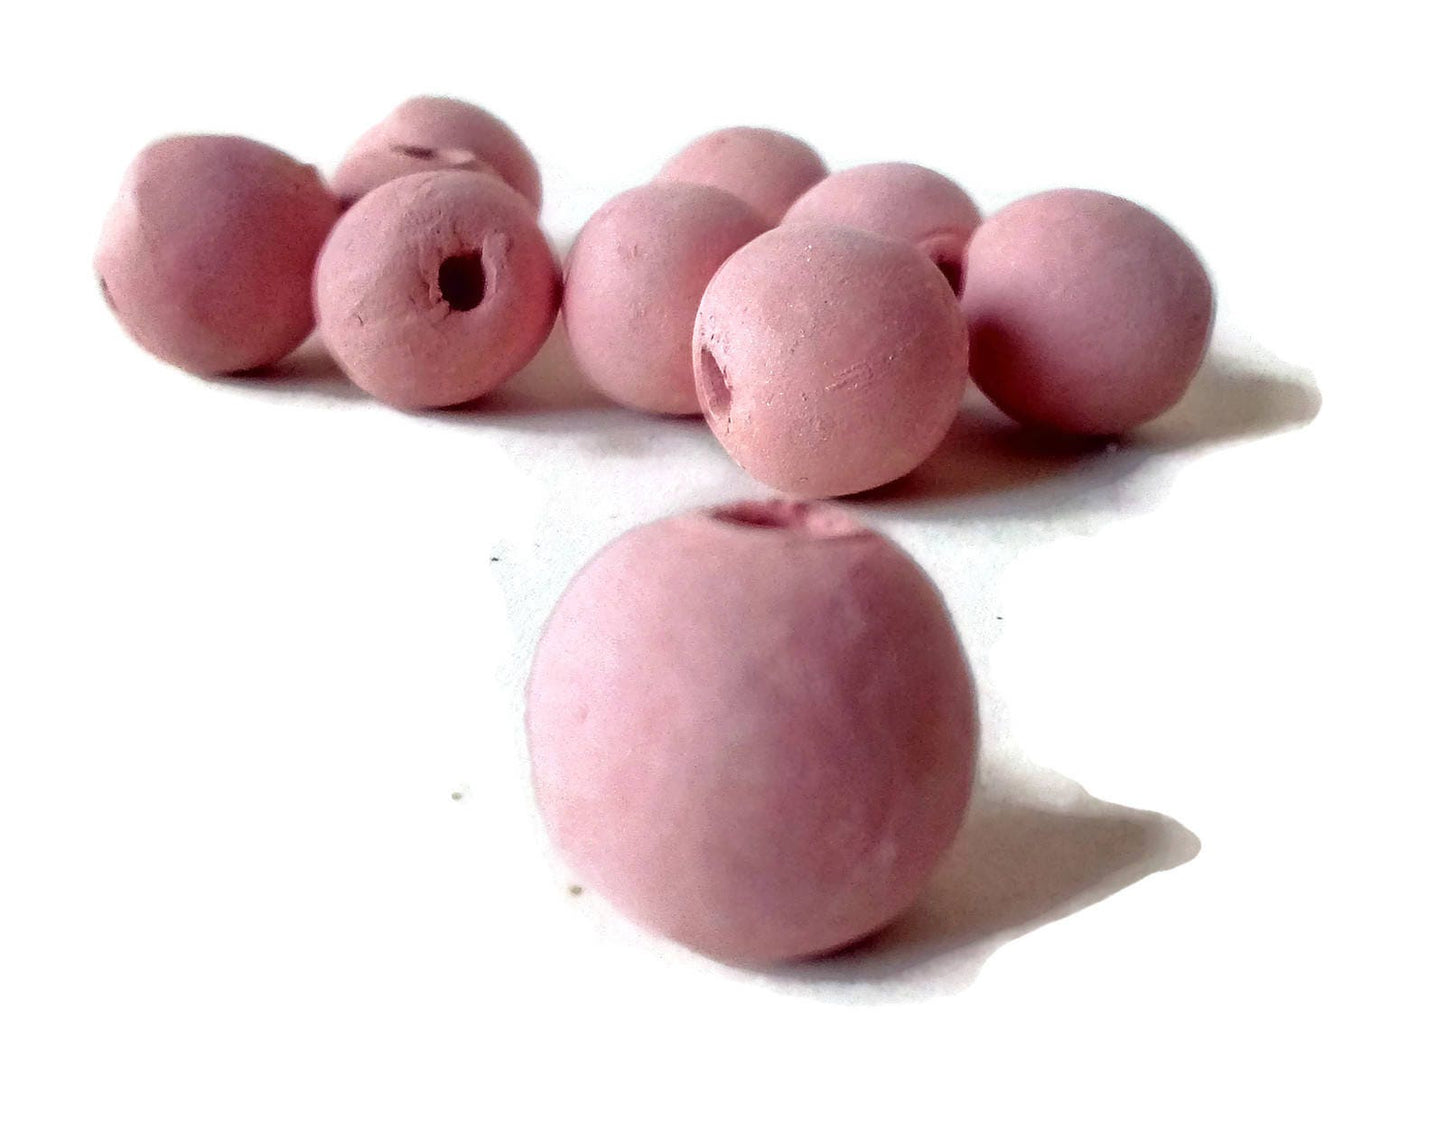 Clay Beads For Jewelry Making, Set Of 10 Handmade Macrame Beads Ceramic Trending Now, Best Sellers Round Bubblegum Beads Unique Porcelain - Ceramica Ana Rafael